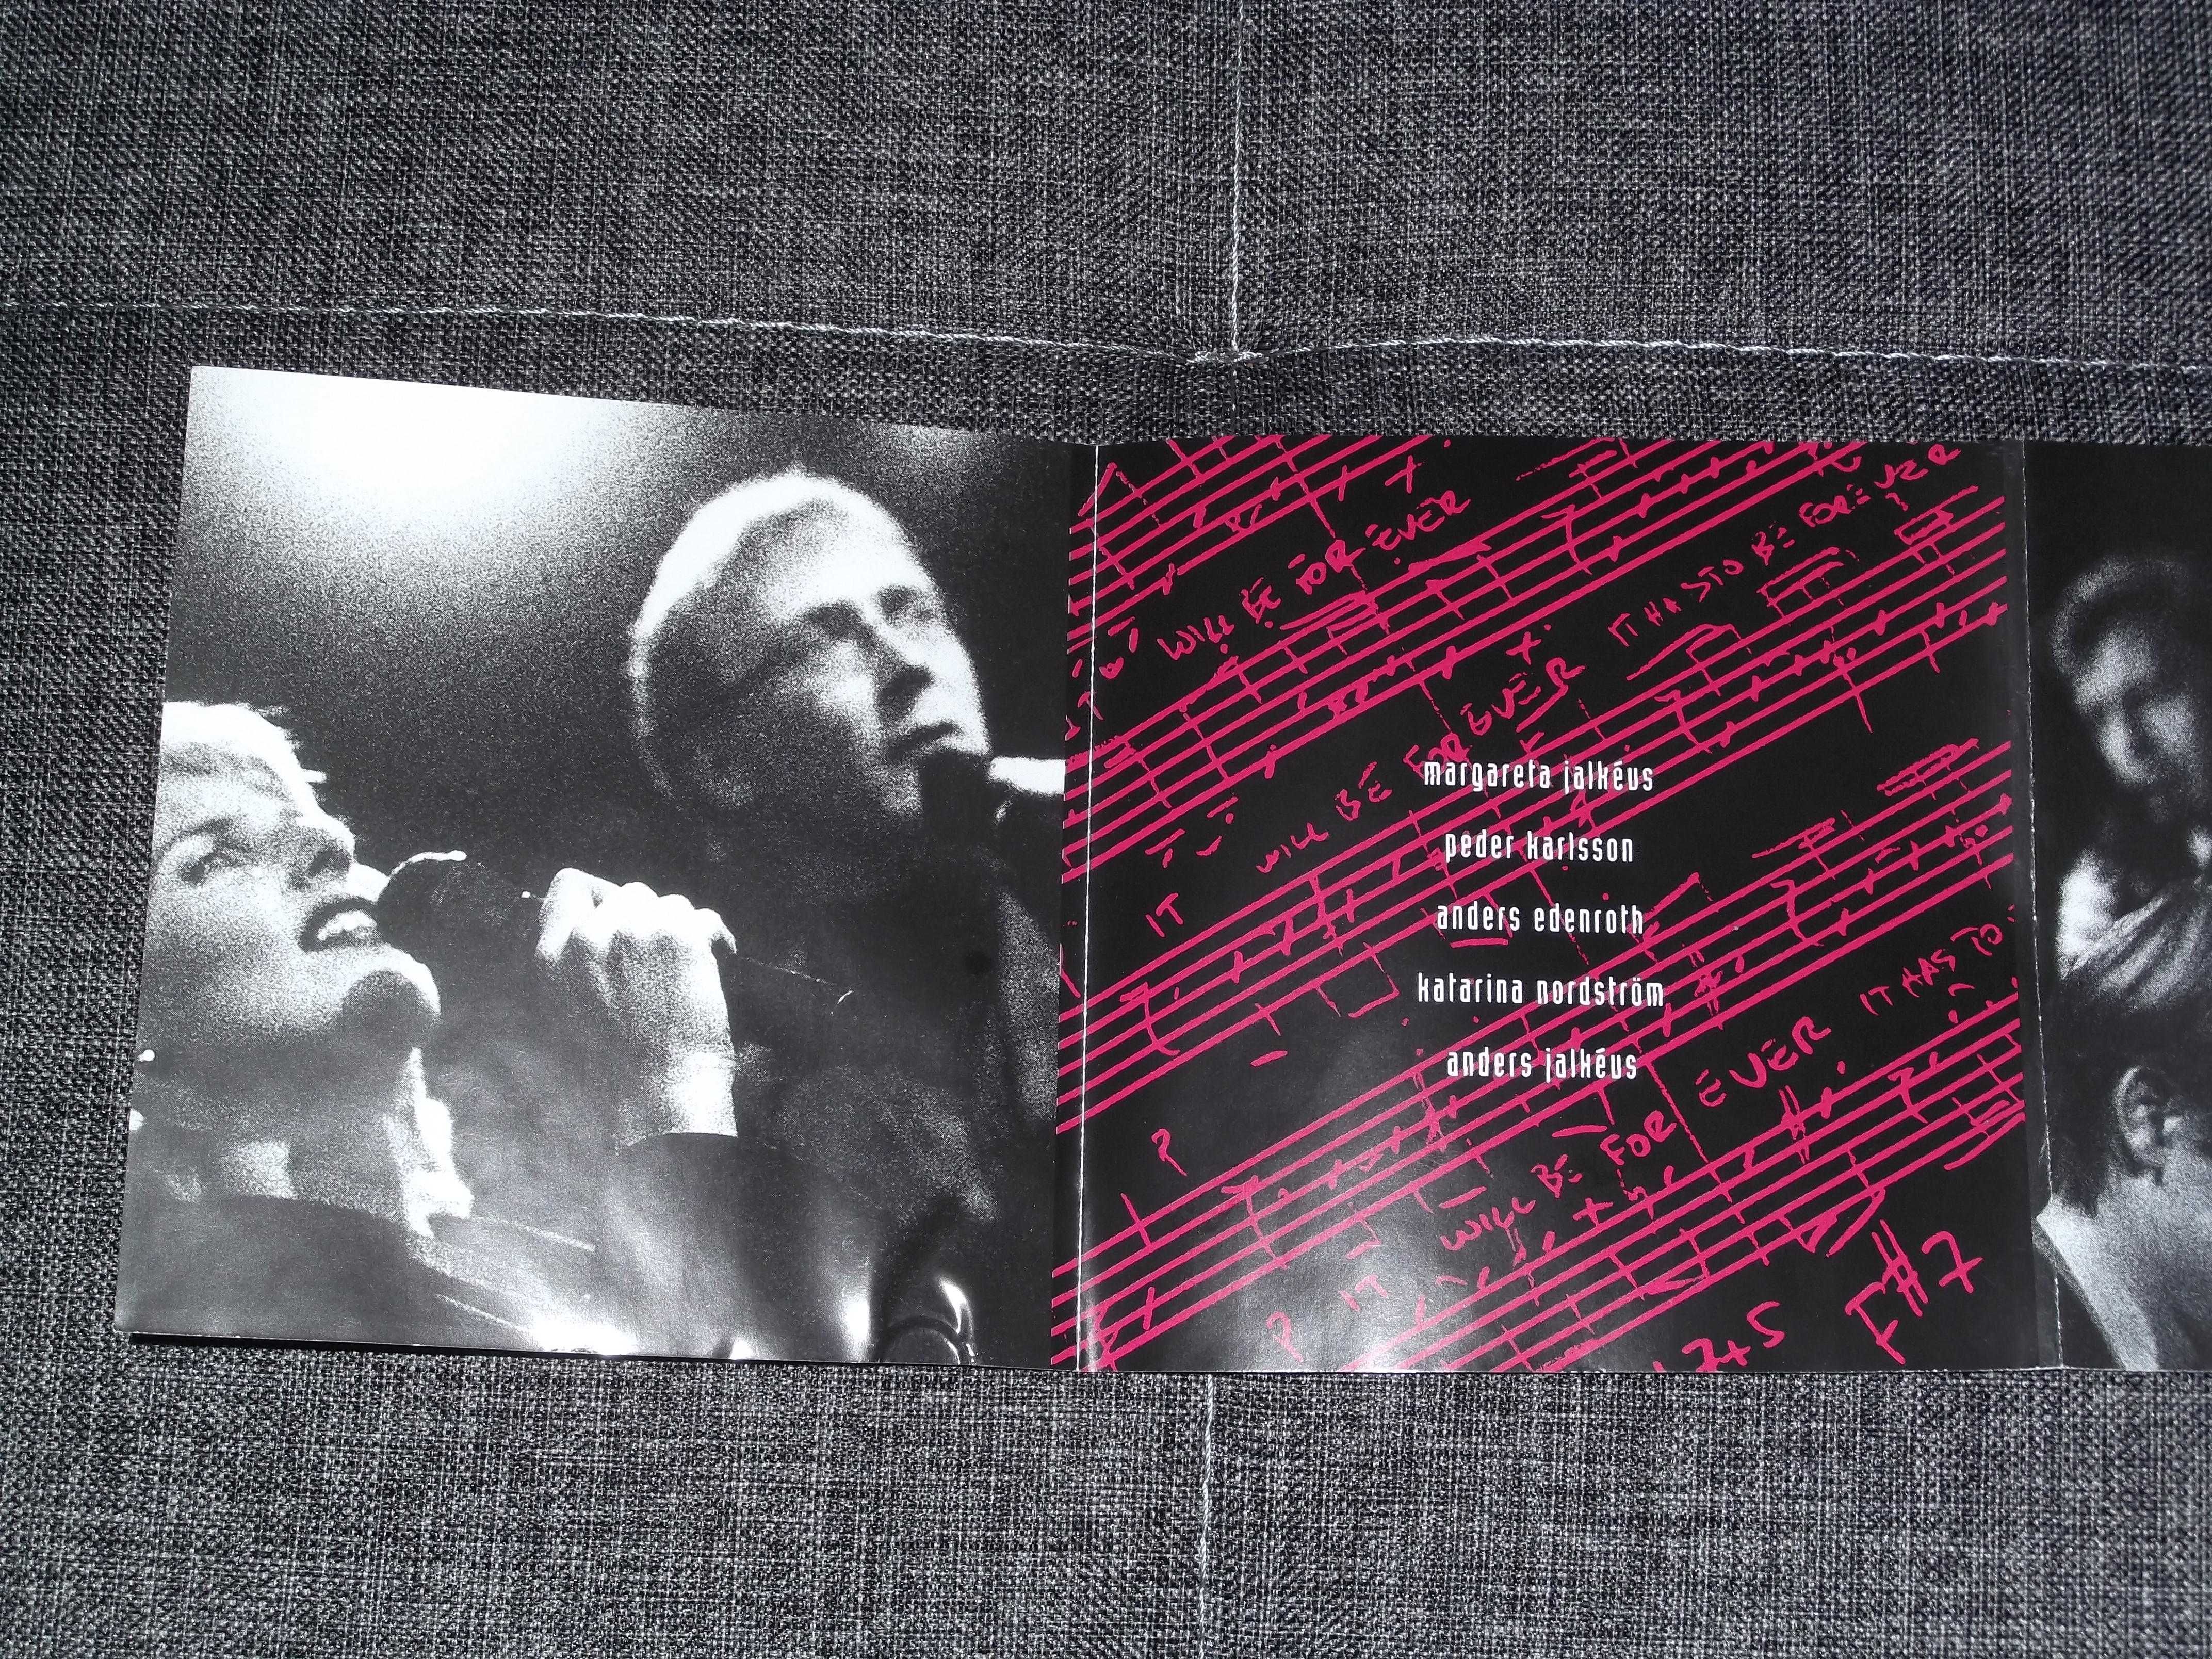 CD. THE REAL GROUP - Jazz:Live; out-of-print, RARYTAS!